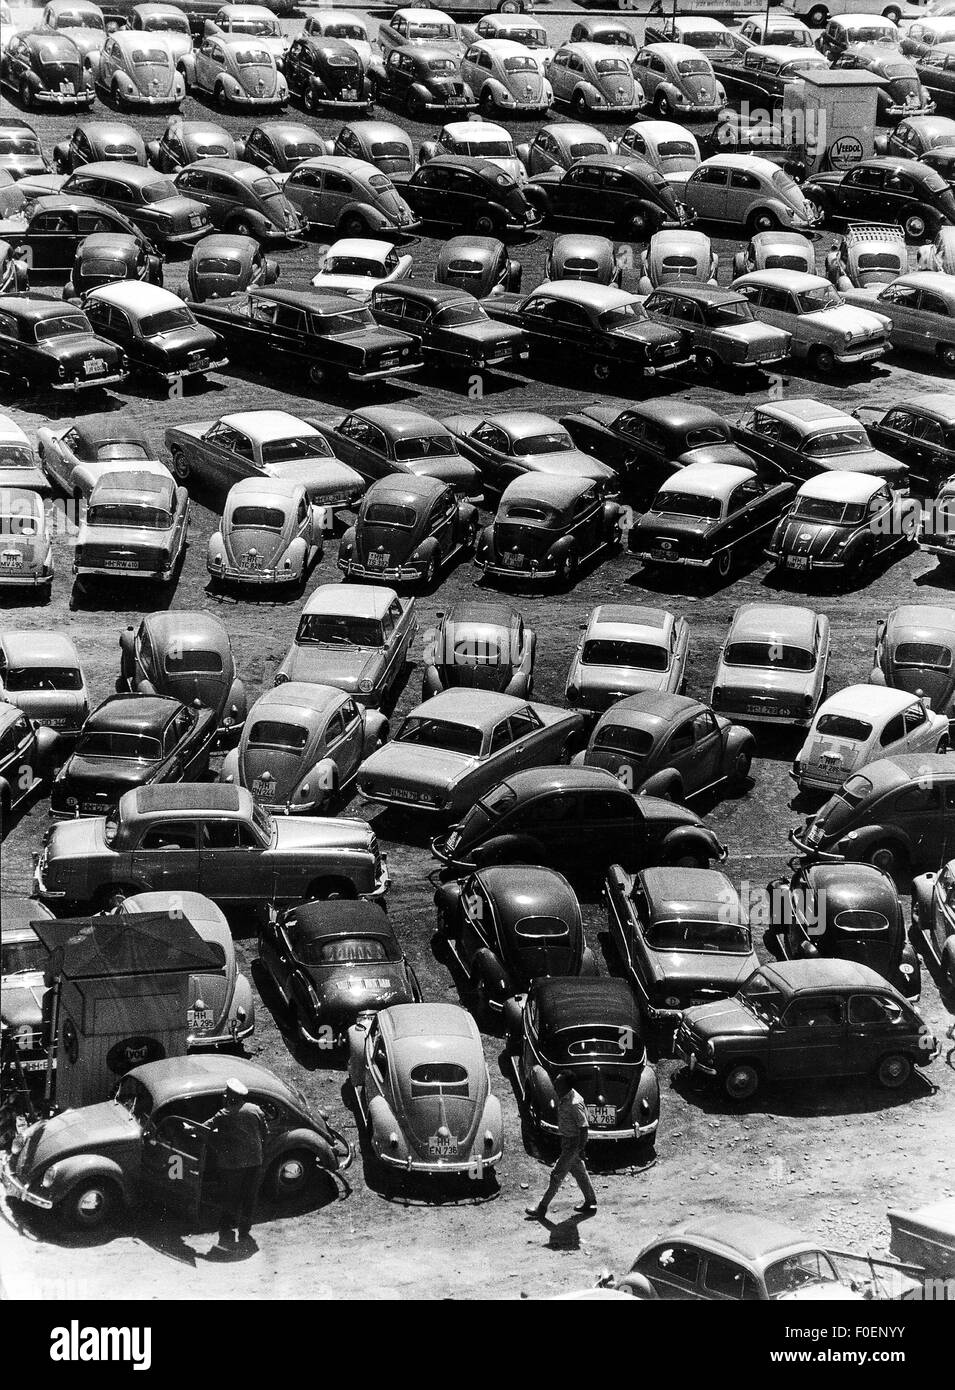 transport / transportation, car, sale, car park with car dealer, Volkswagen, 1950s, 50s, 20th century, historic, historical, VW beetle, lot, lots, a lot of, full, car dealer, car dealership, car dealers, car dealerships, car dealer, audealer, car dealers, audealers, stagnation, used car, used cars, new car, new cars, buying, purchase, point of purchase, sale, sales, car, cars, automobile, automobiles, sellout, big seller, runner, long seller, car park, parking lot, car parks, parking lots, people, Additional-Rights-Clearences-Not Available Stock Photo